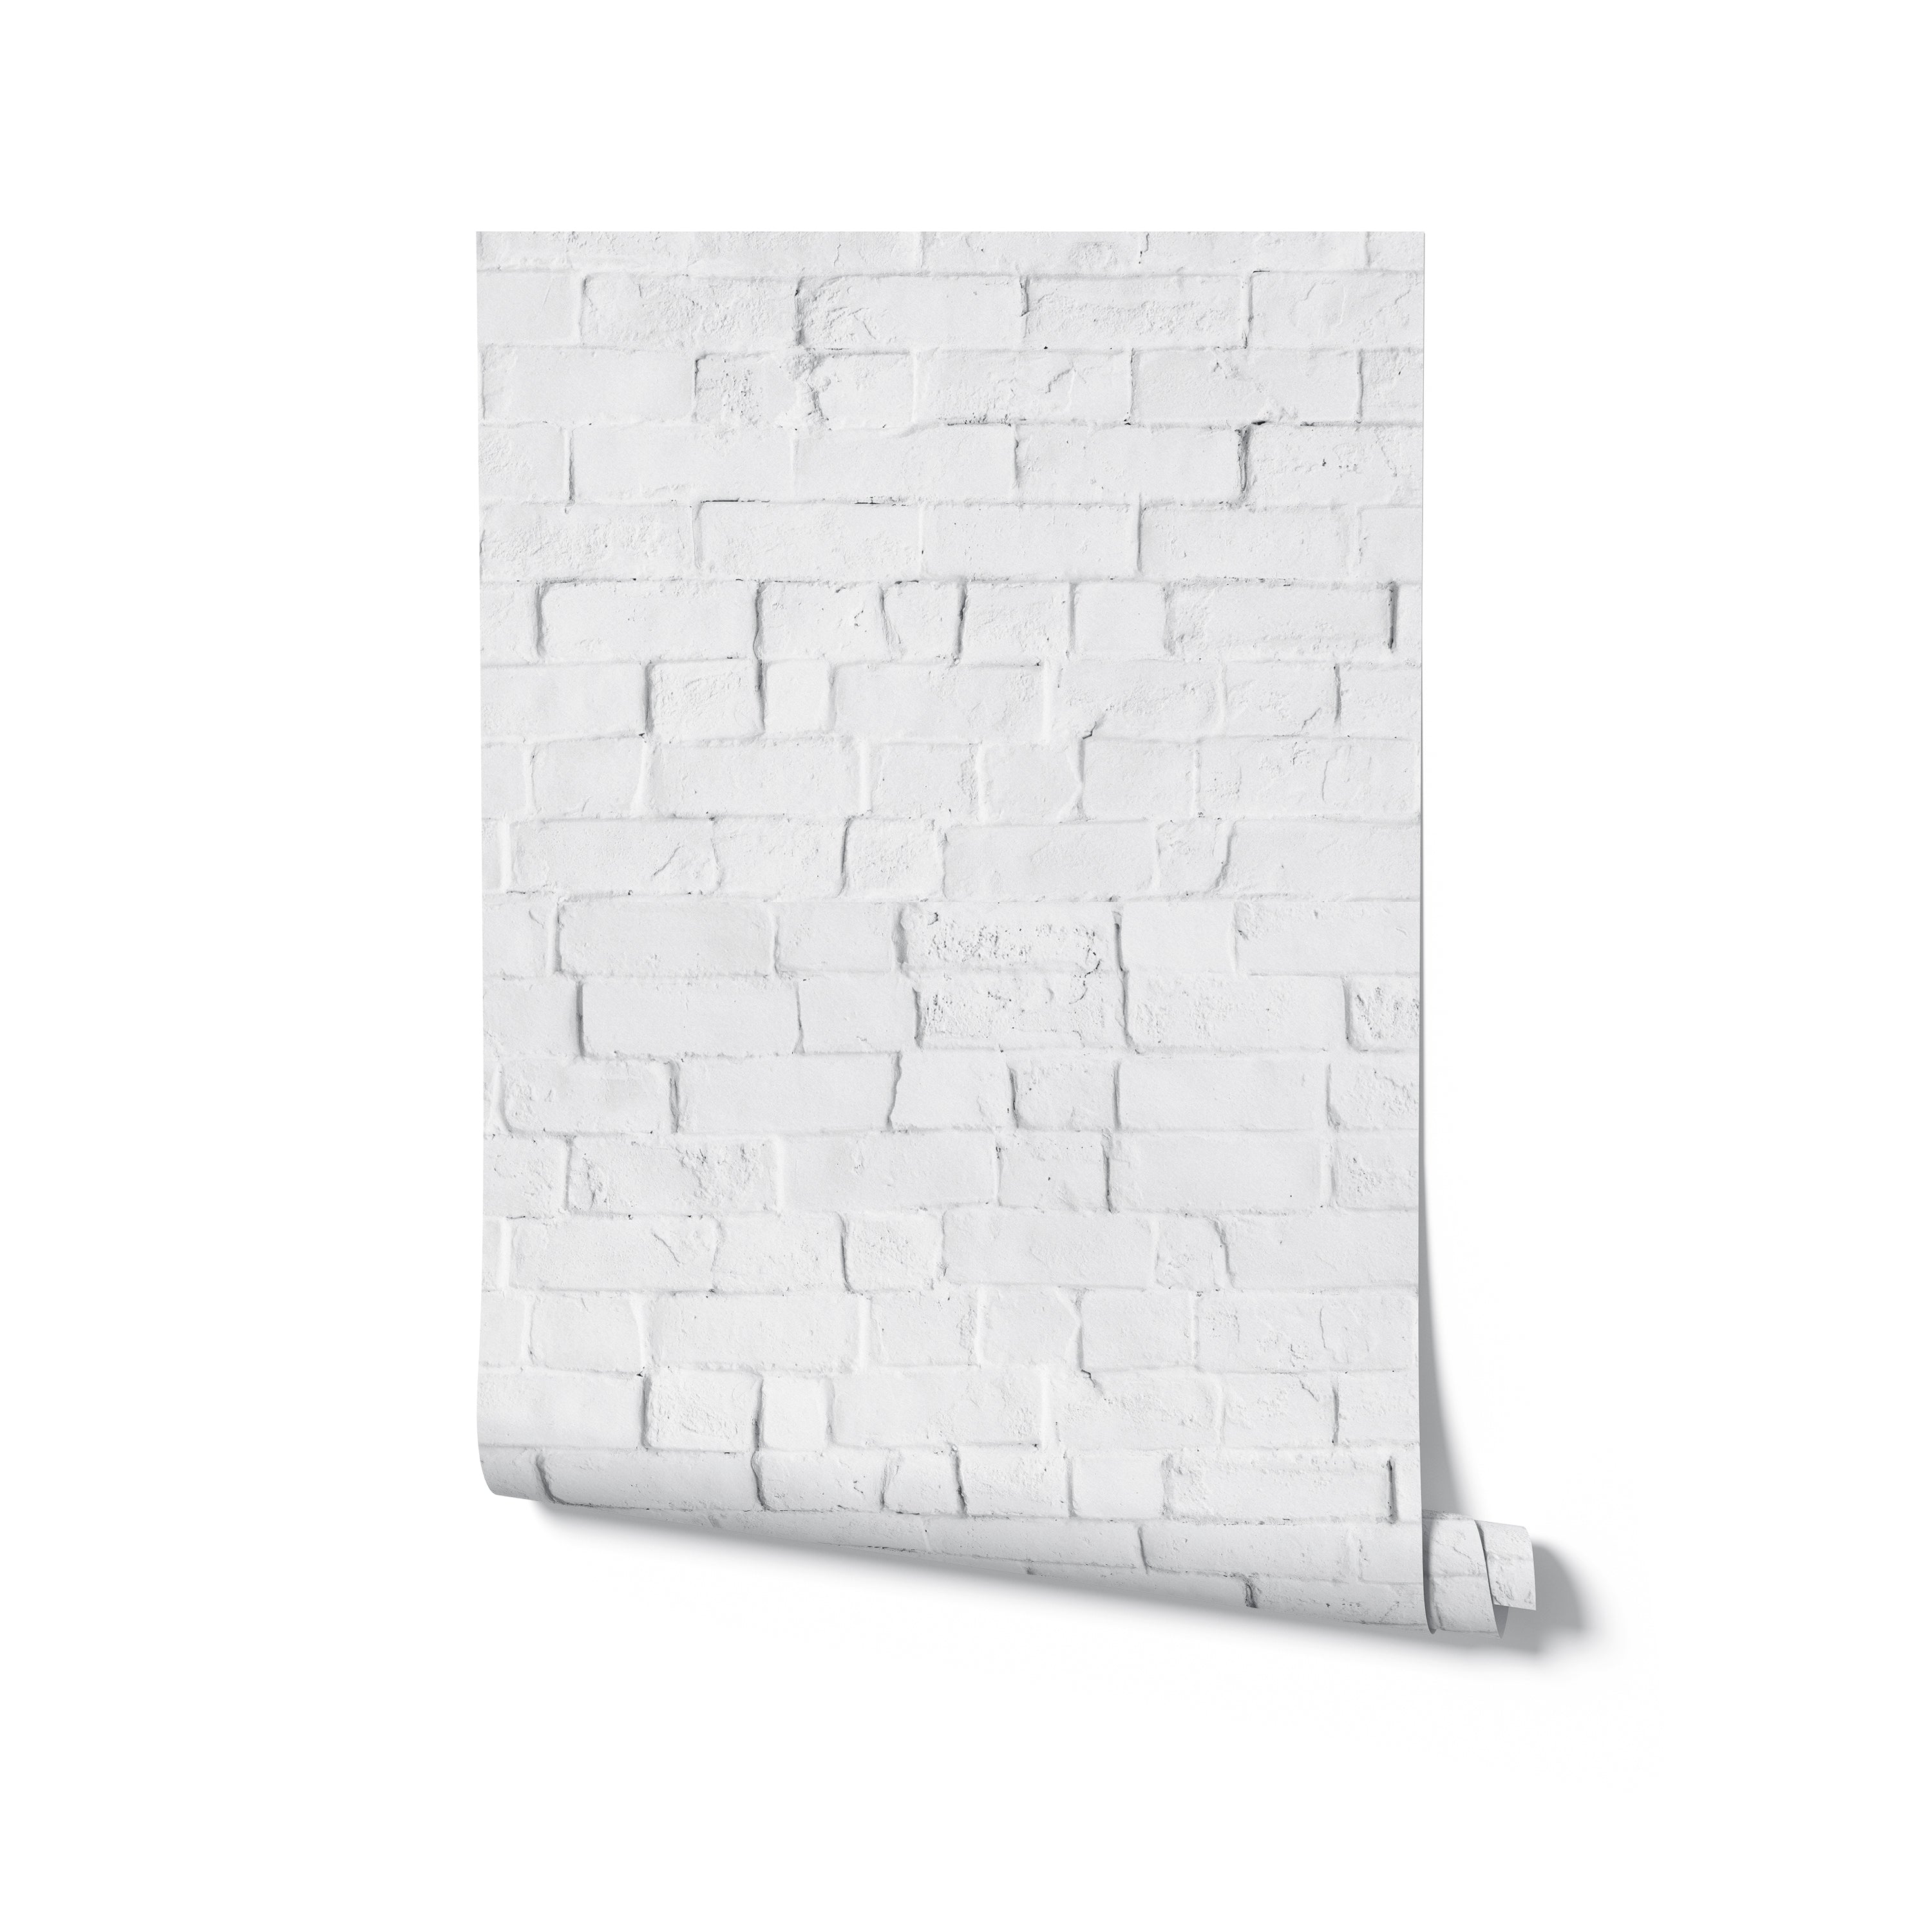 A rolled-up piece of the Realistic White Brick Wallpaper on a plain background, showing off the lifelike brick texture and the wallpaper's ability to transform a space. The roll suggests potential for an easy home makeover, with the wallpaper's design suitable for a variety of living spaces looking for a touch of modernity.